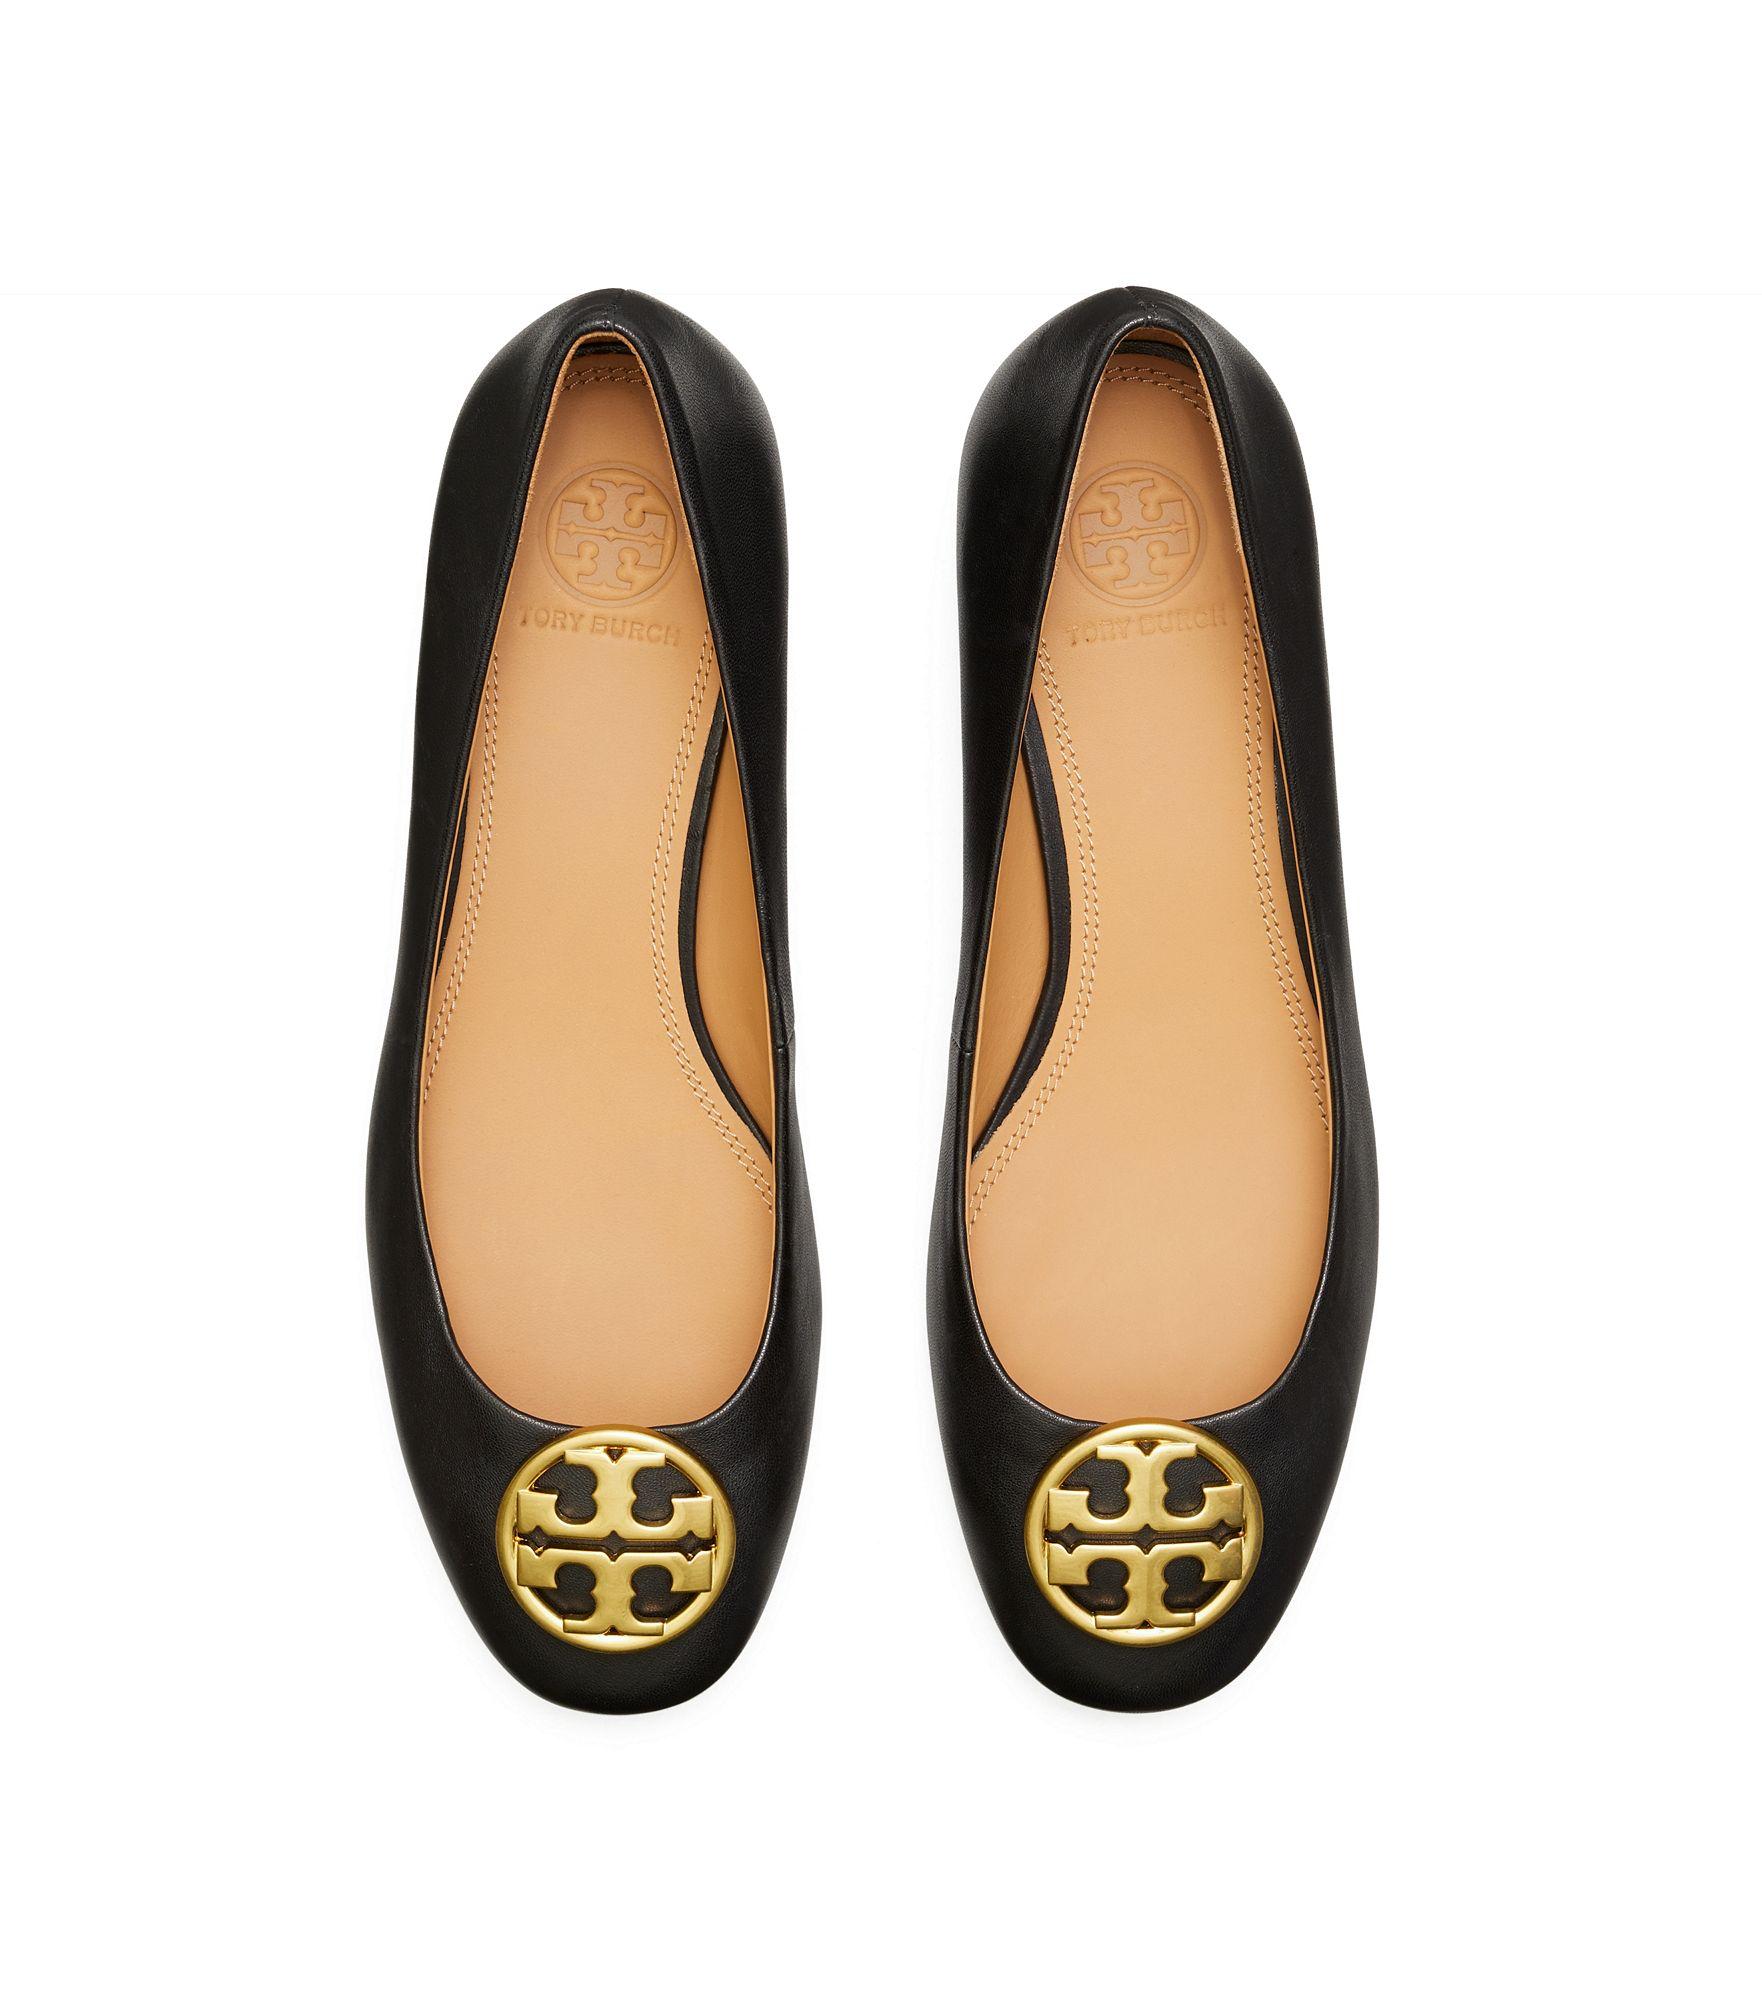 Tory Burch Leather Chelsea Heelsed Ballet Flats in Black - Lyst